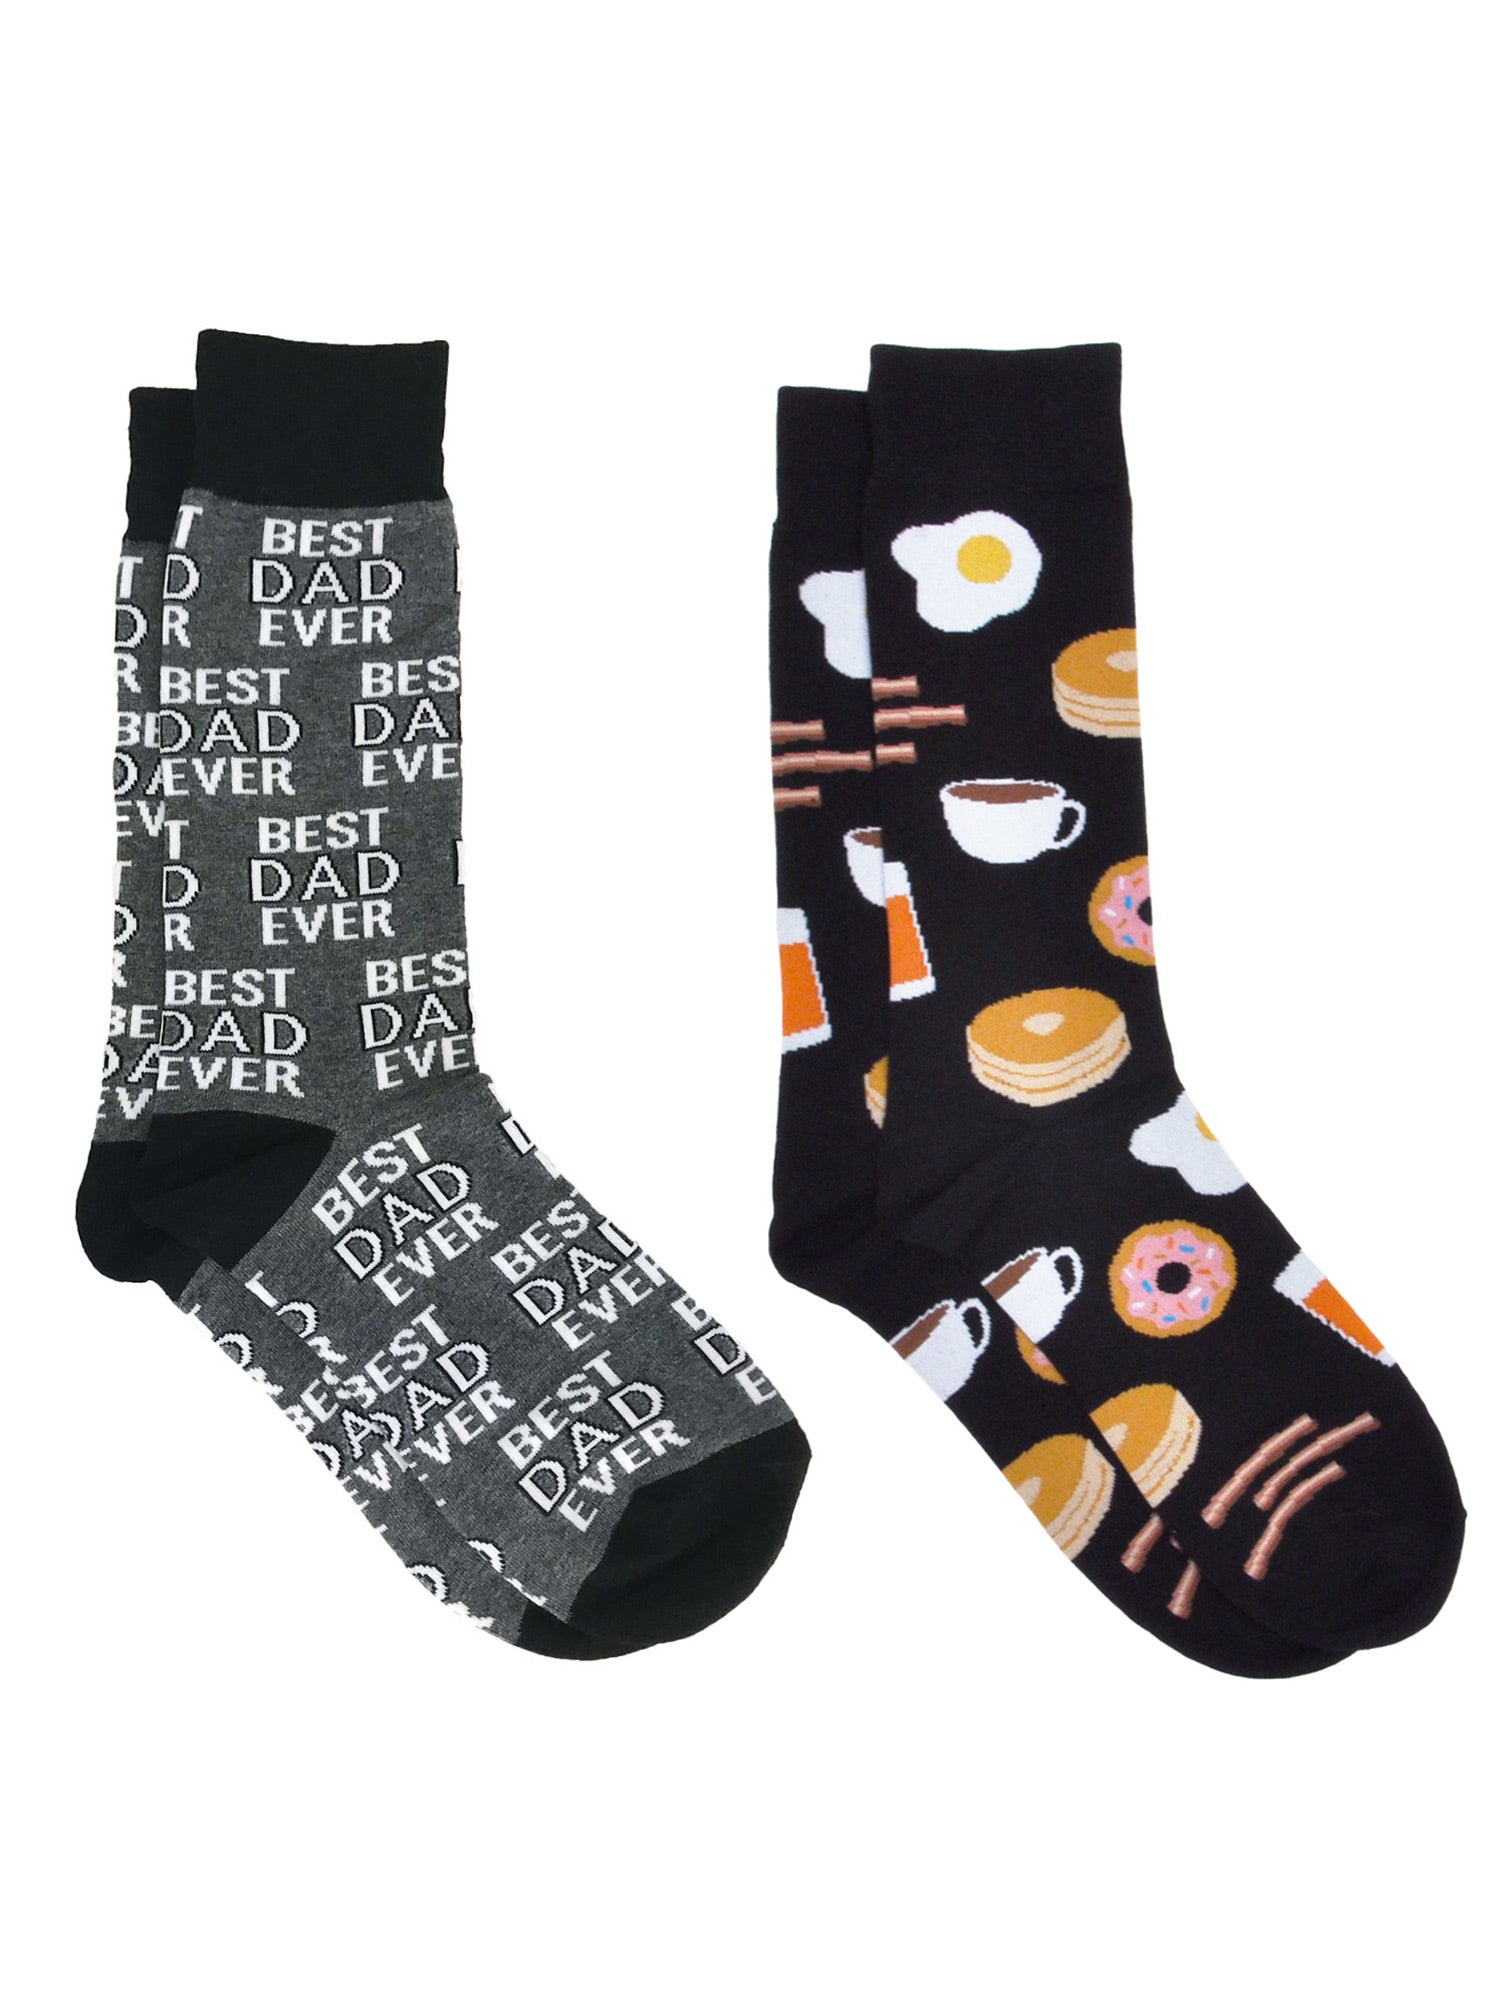 Men's Best Dad Ever Socks Grey and Breakfast Socks All-Over Eggs Bacon Coffee